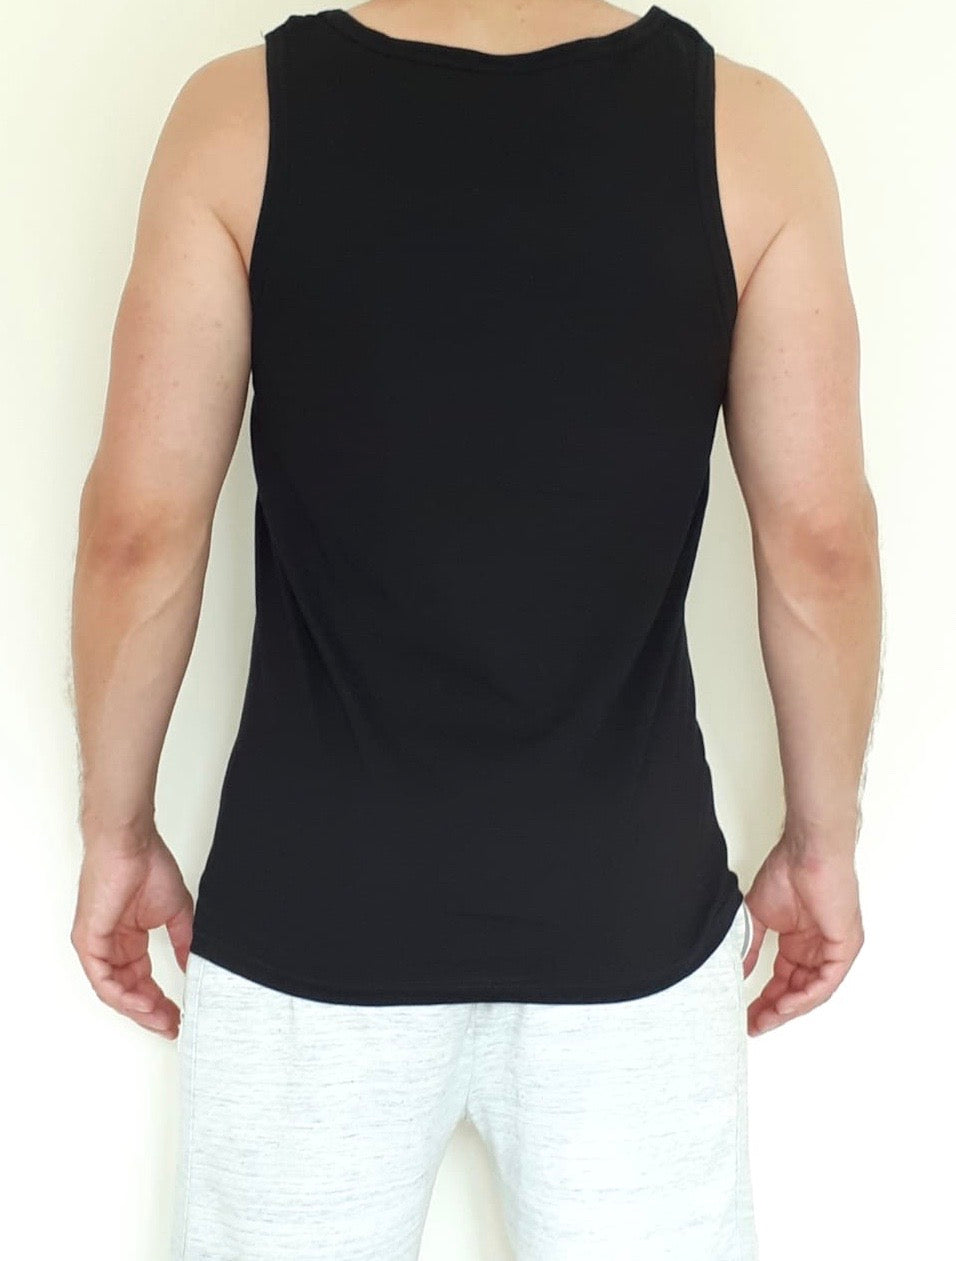 Men's black vest with Solo Traveller text. View of the back